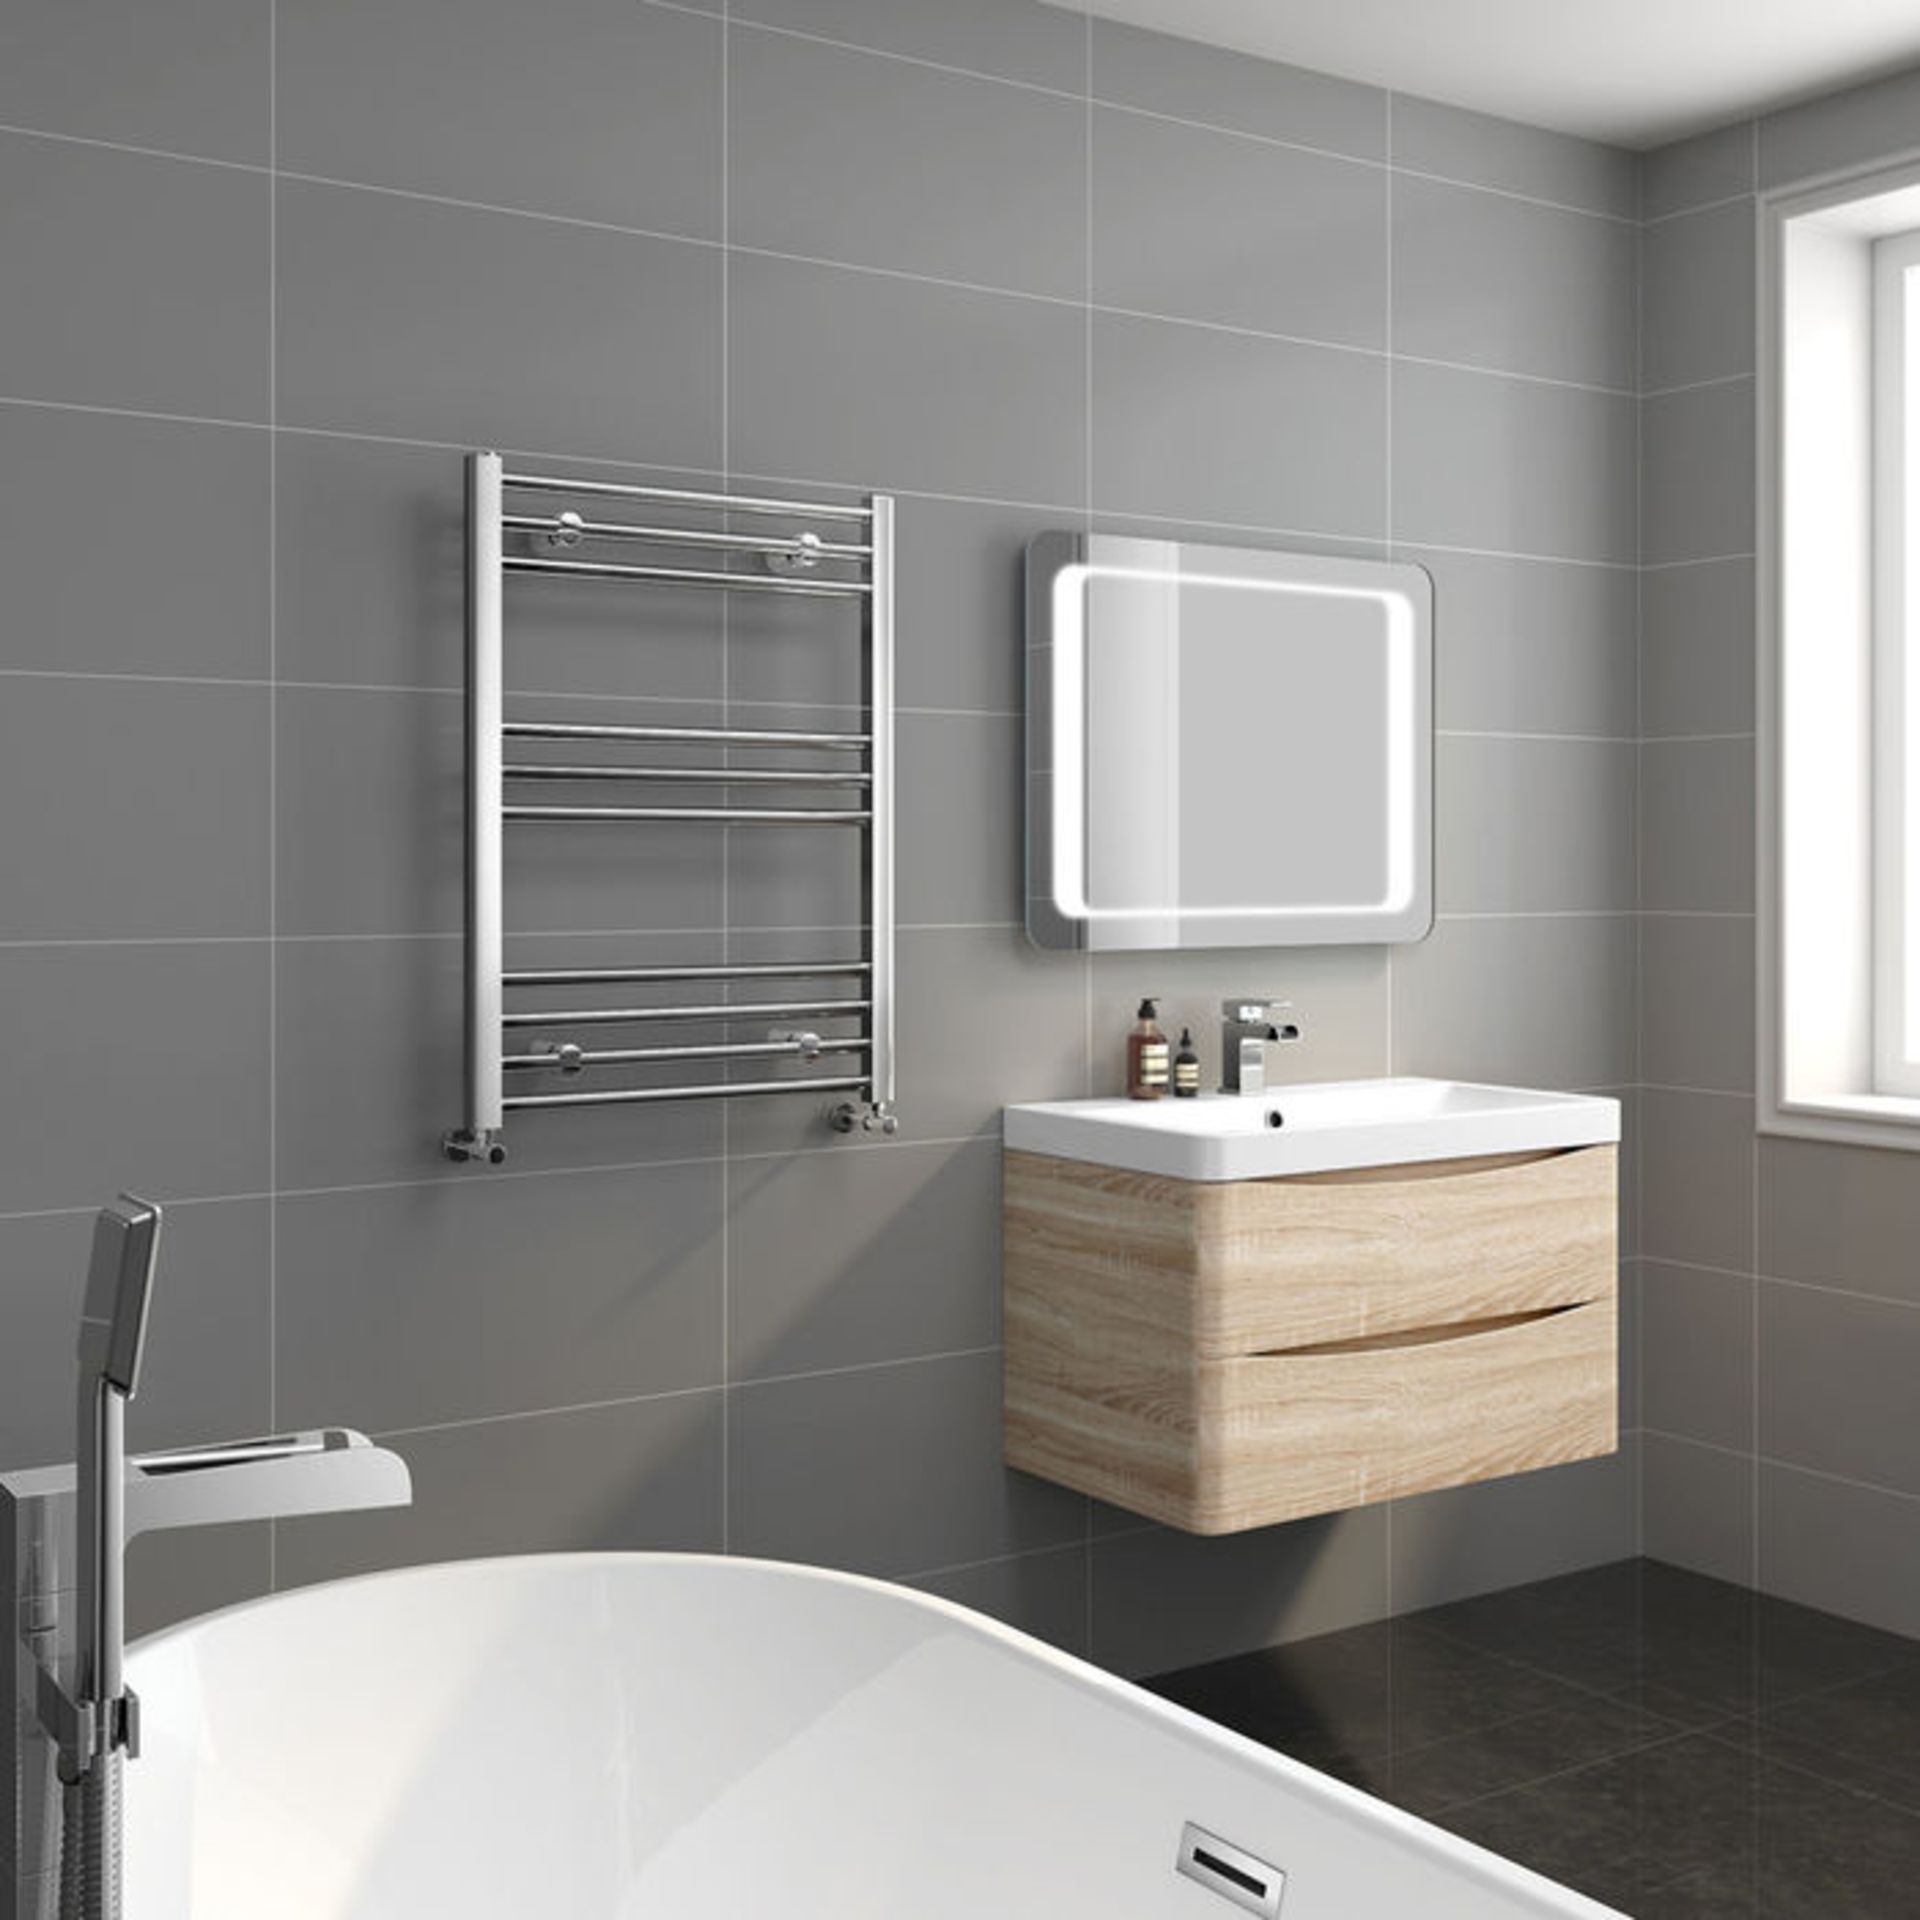 (AH148) 800x600mm - 20mm Tubes - Chrome Heated Straight Rail Ladder Towel Radiator. Low carbon steel - Image 2 of 2